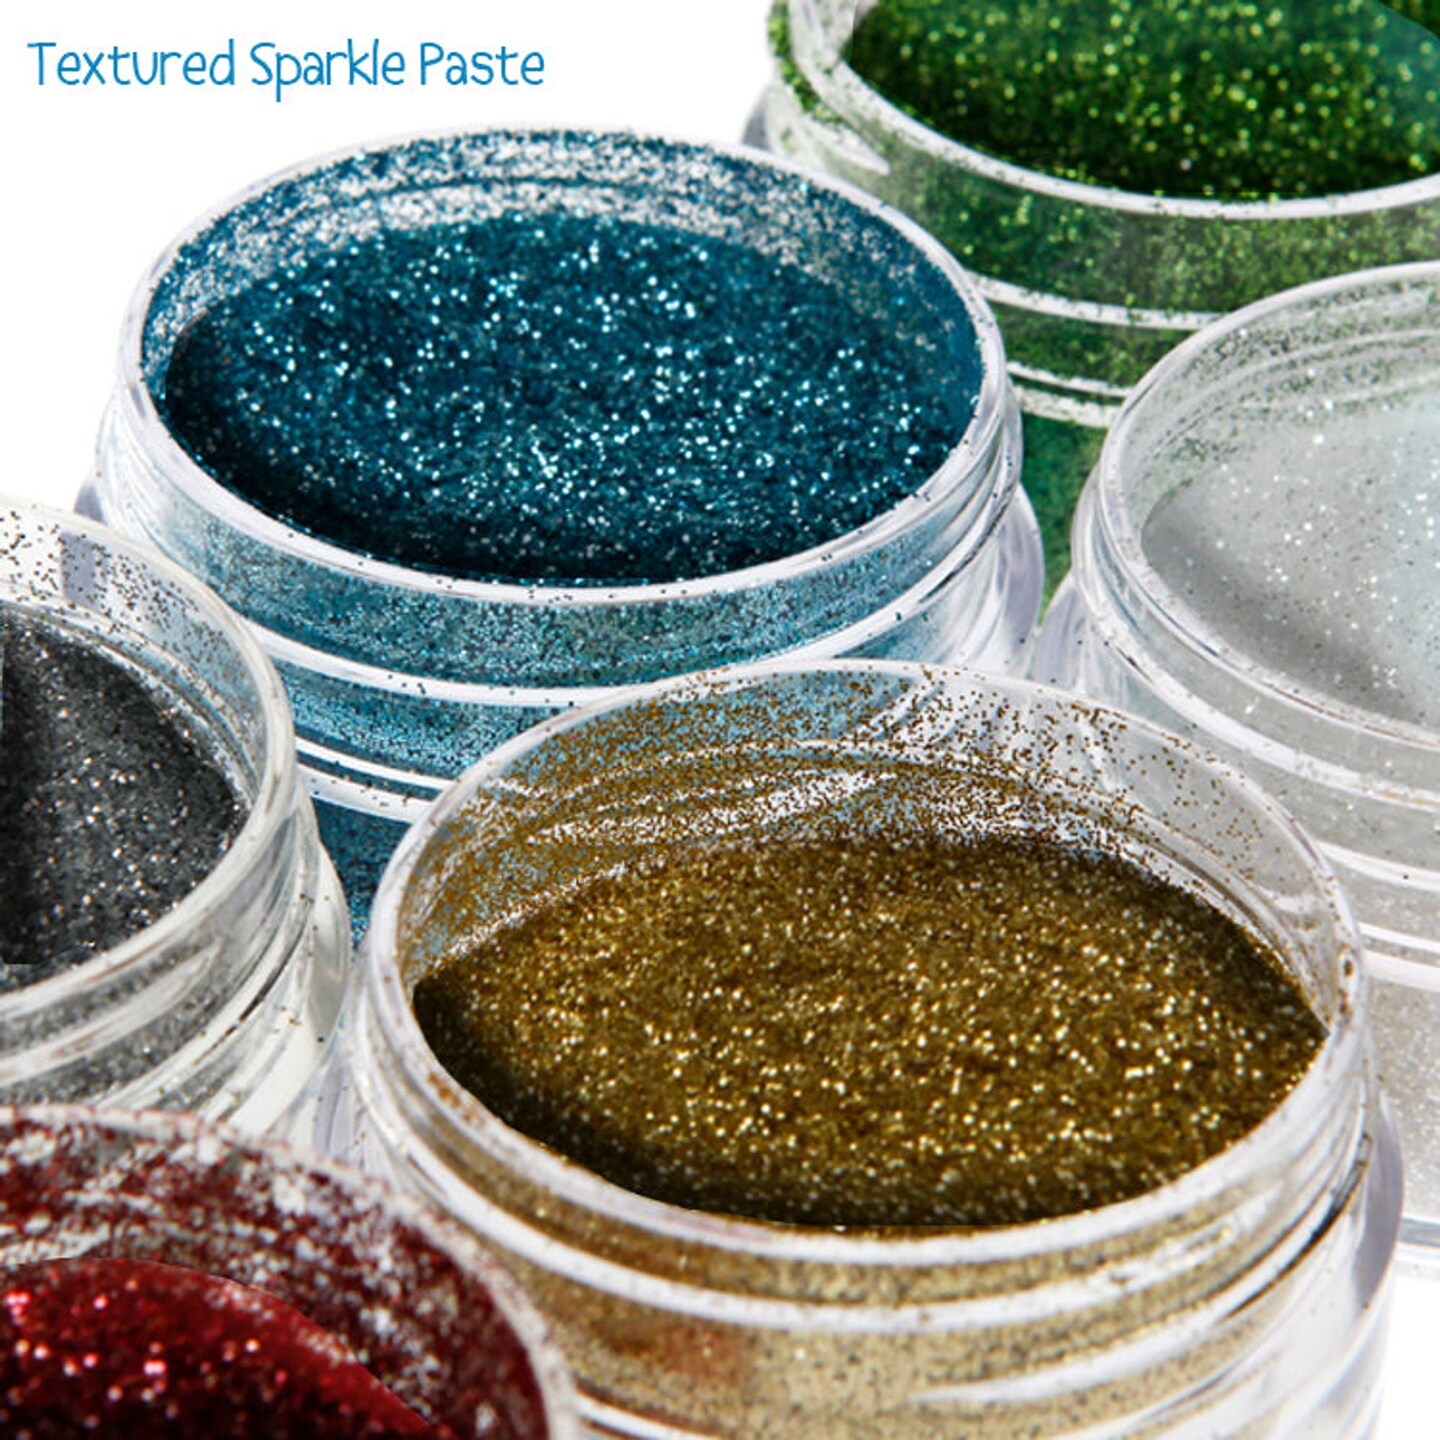 Cosmic Shimmer  Textured Sparkle Paste - Warm Gold